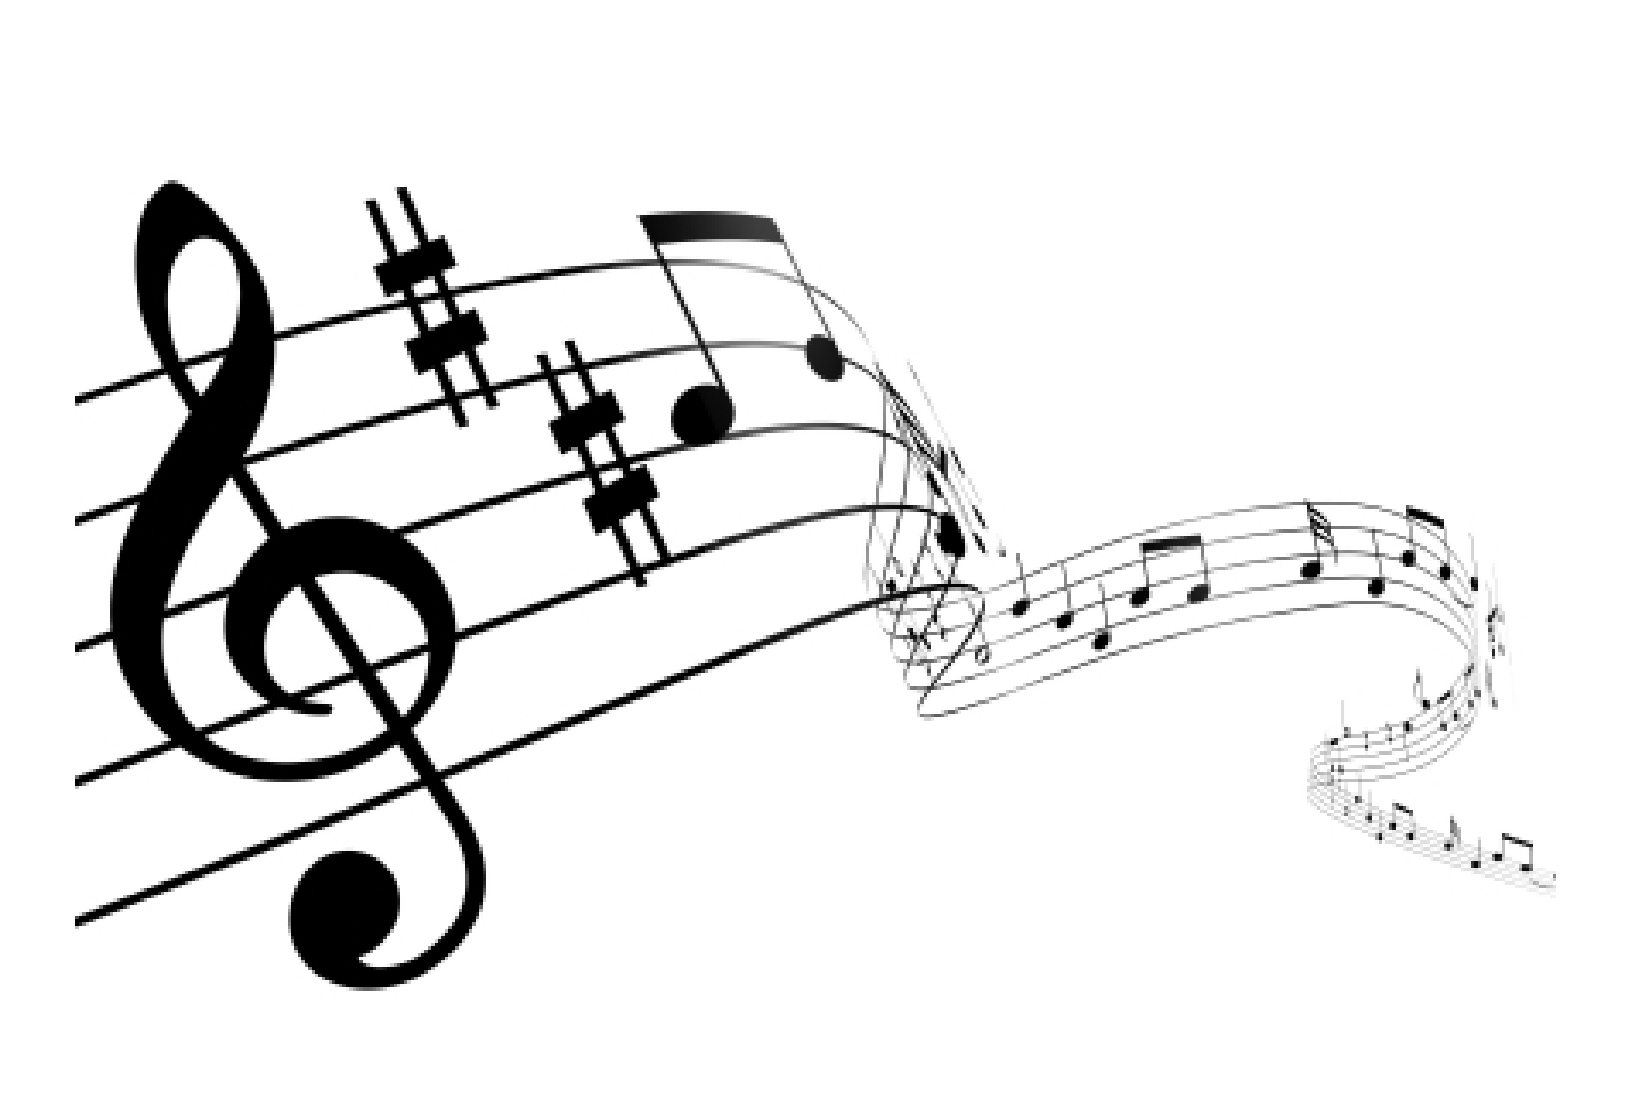 Free music notes.